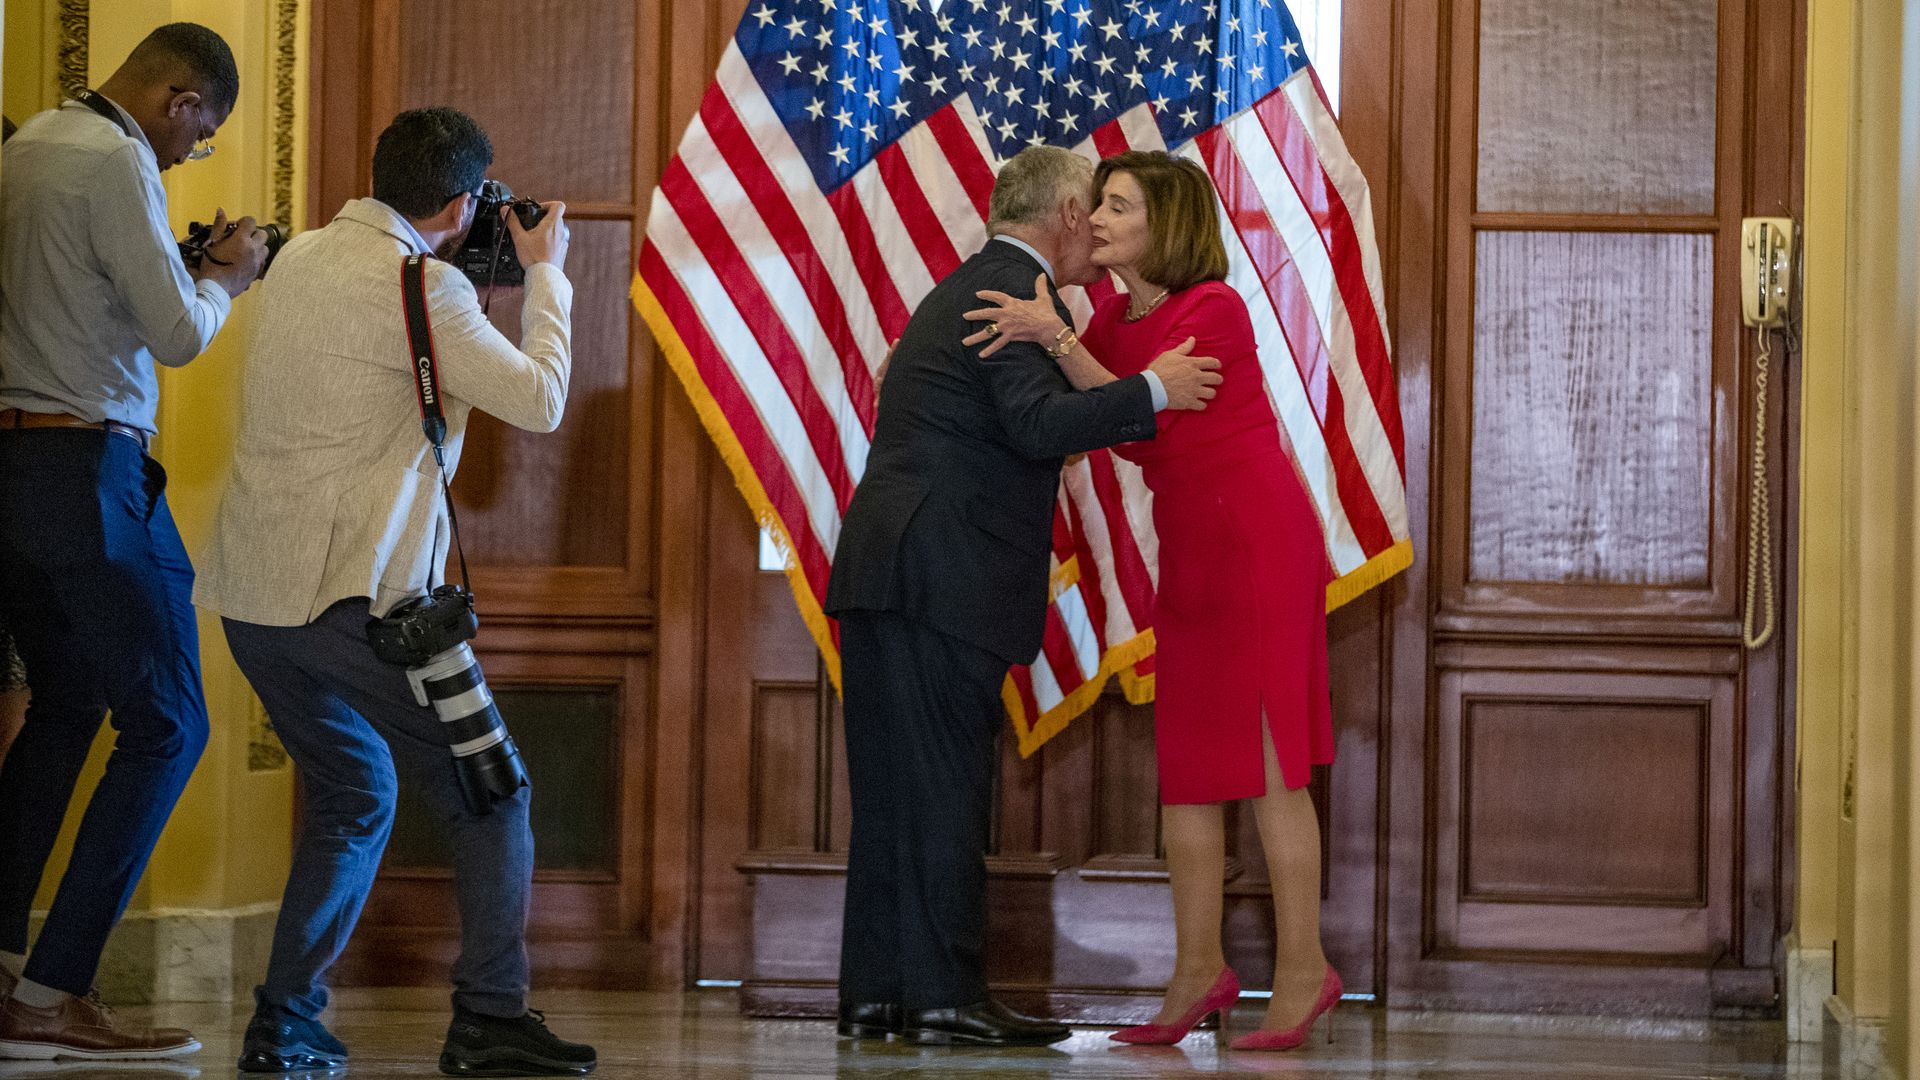 Photographers are seen capturing House Speaker Nancy Pelosi as she welcomes Jordan's King Abdullah to the Capitol.